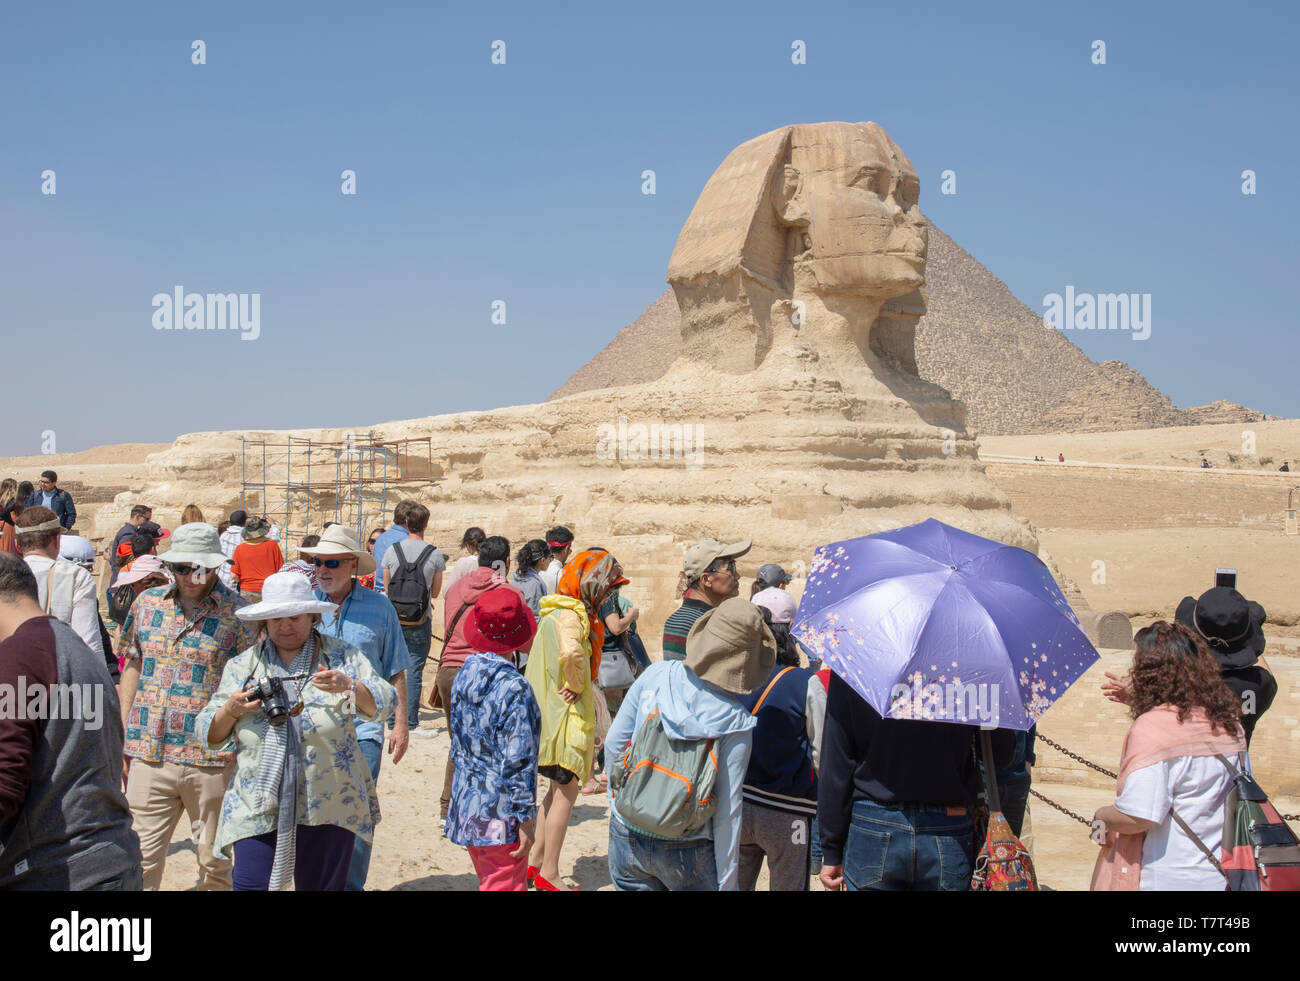 Tourists view the Great Sphinx of Giza. The colossal statue is said to have been created around 2500 BCE for Pharaoh Khafra, and bears his likeness. Stock Photo